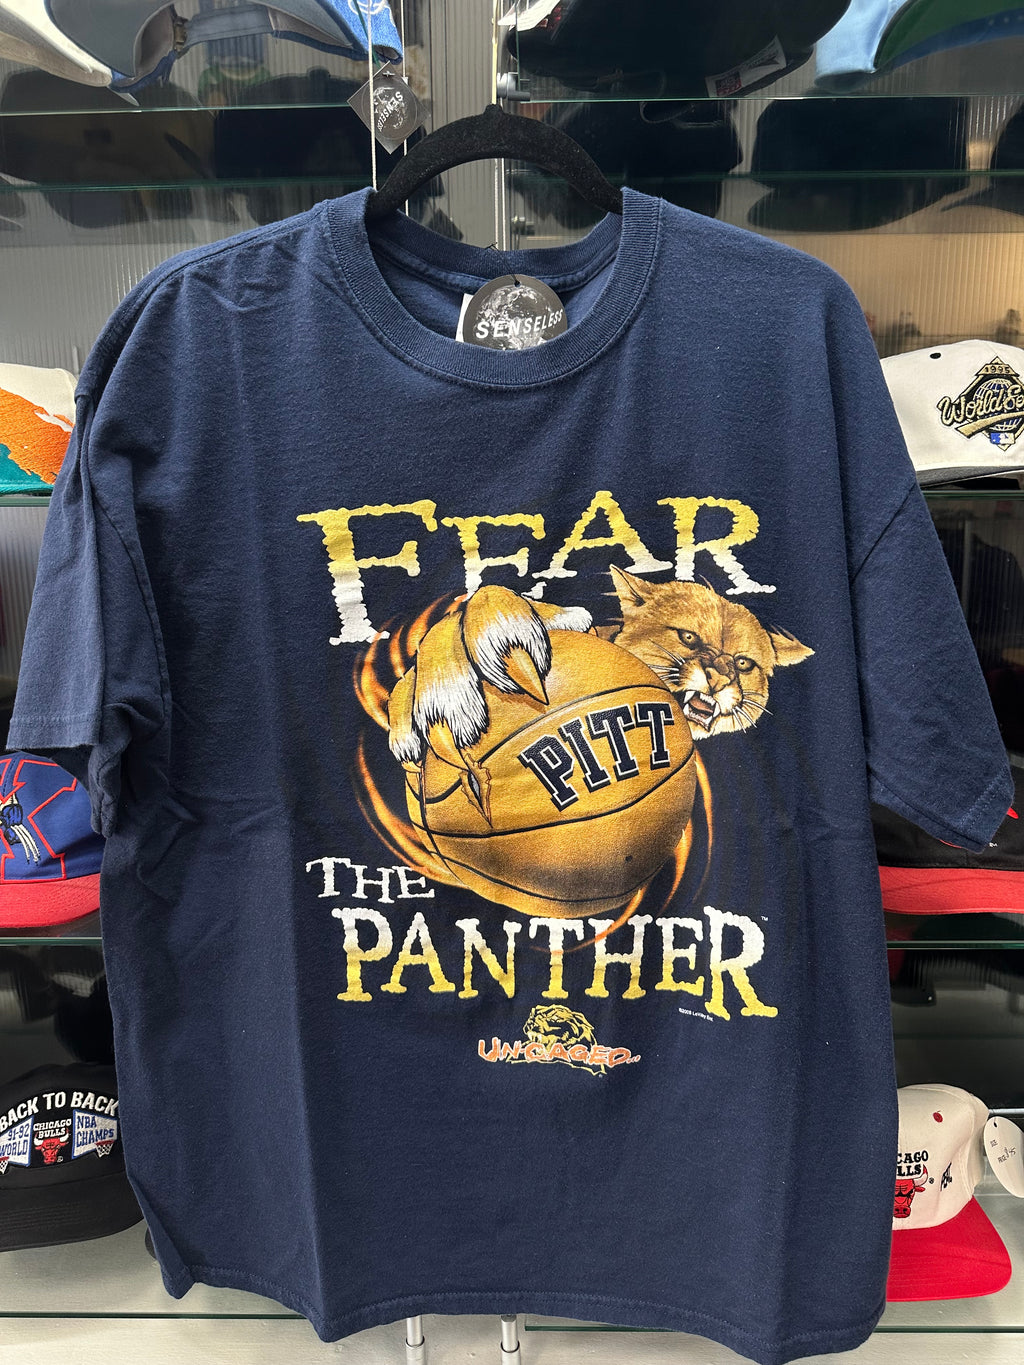 Pitt Panthers Graphic Tee